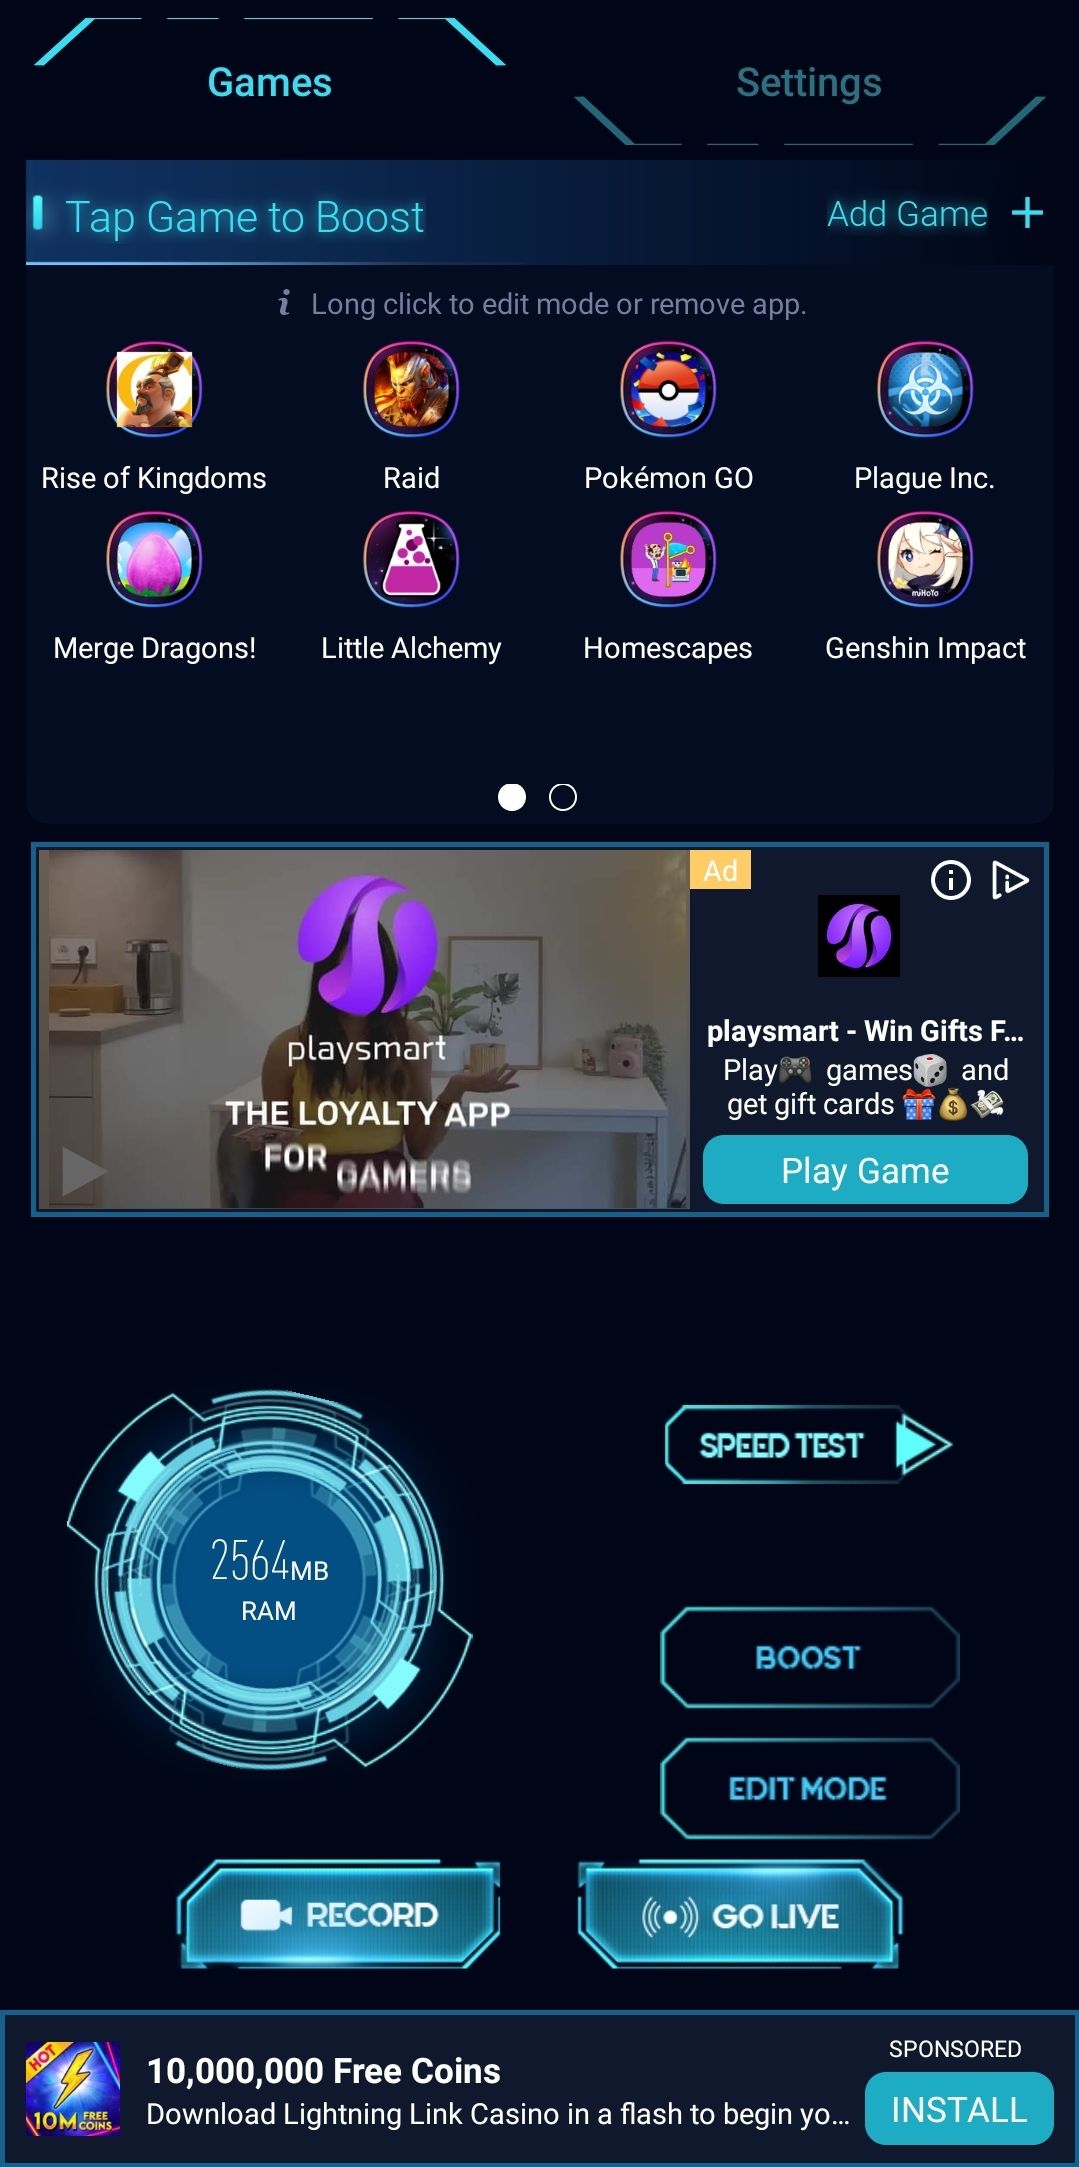 Game Booster's home screen is crowded but puts boosting front and center